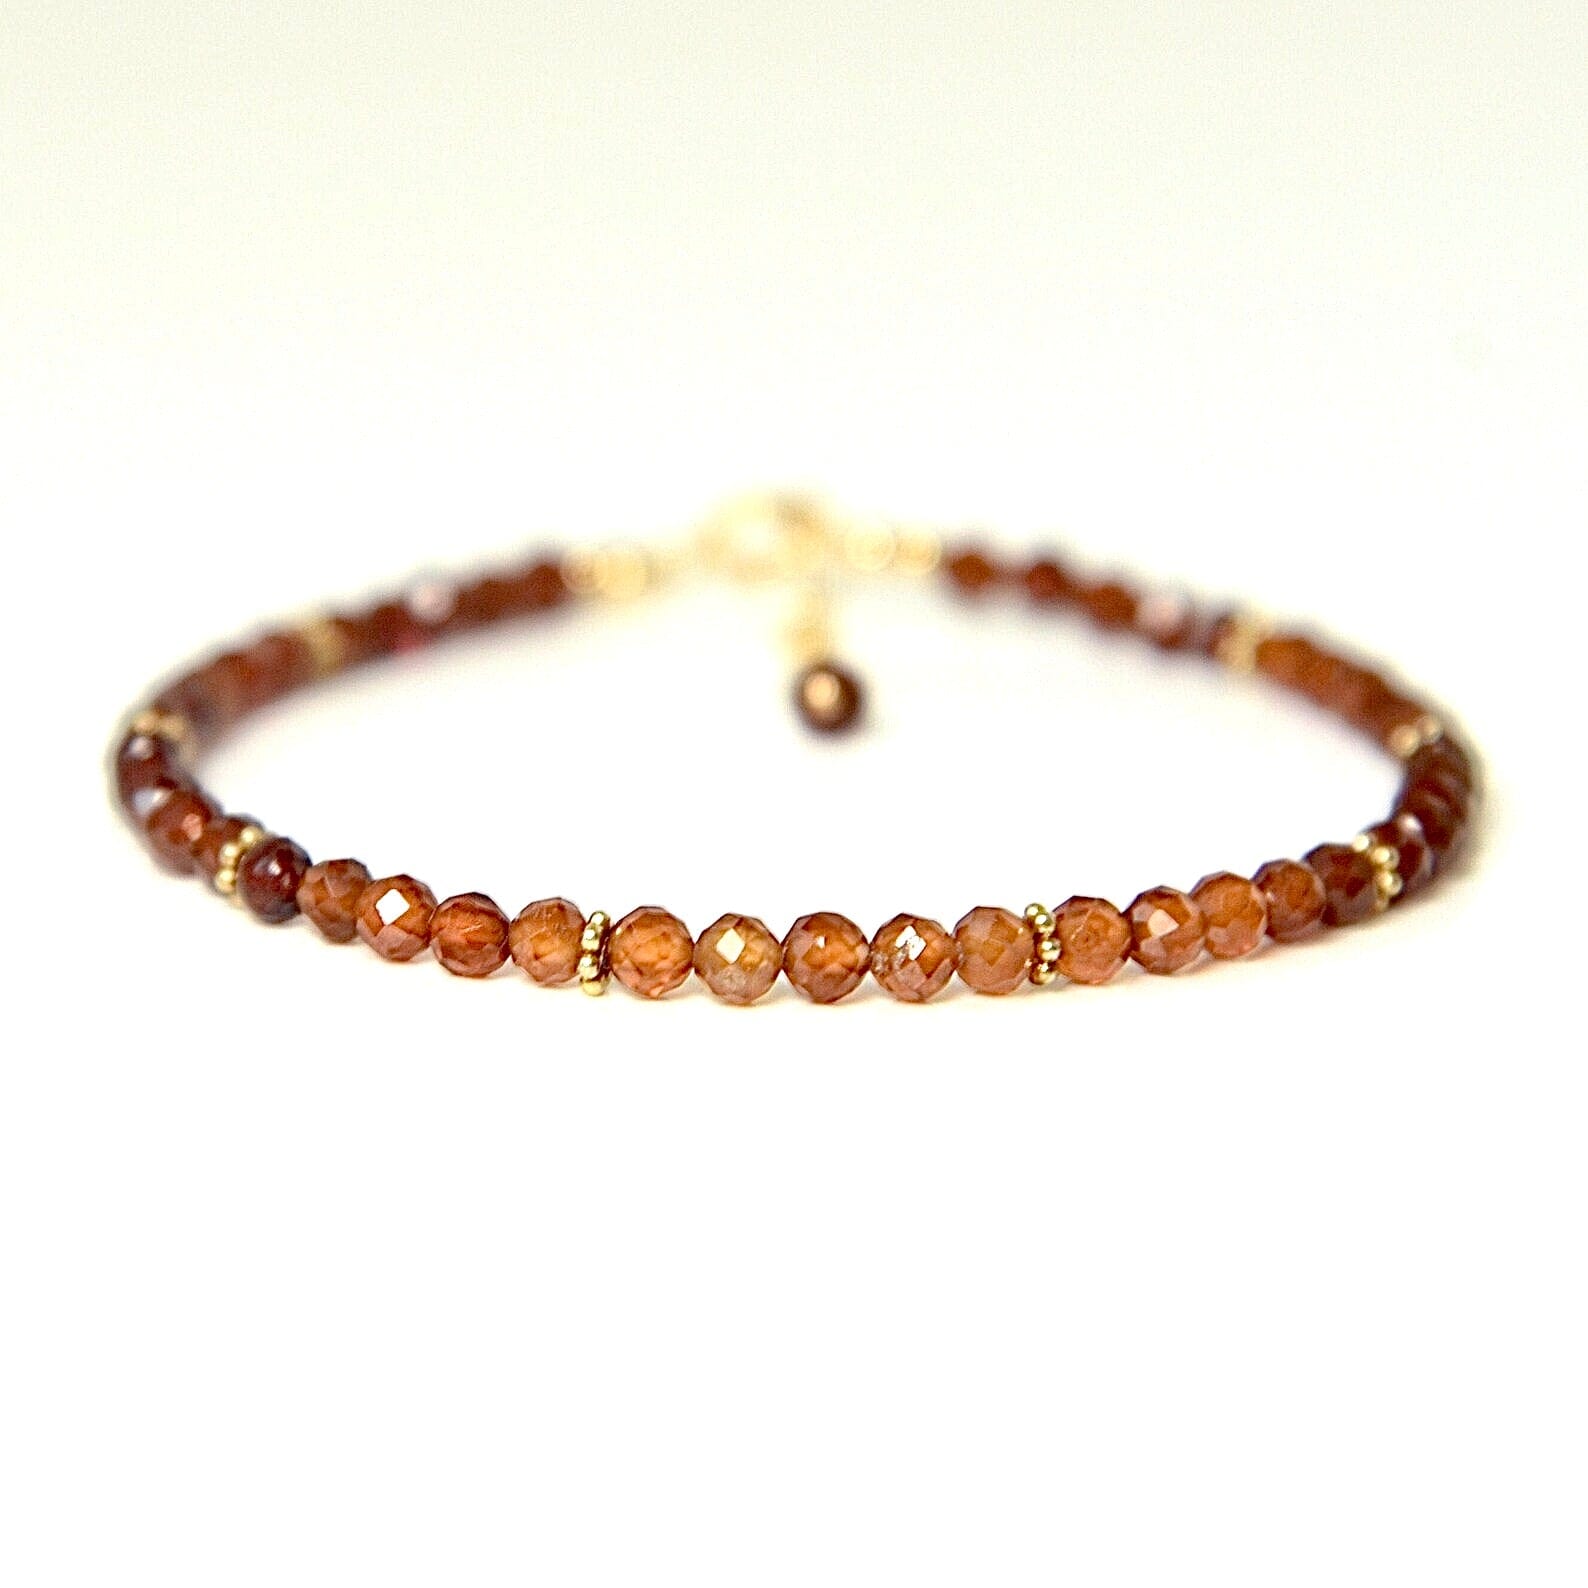 Buy Hessonite Garnet and Sunstone Gemstone Bracelet Gold Filled Crystal  Healing Jewelry Stacking Boho Gift for Woman Online in India - Etsy